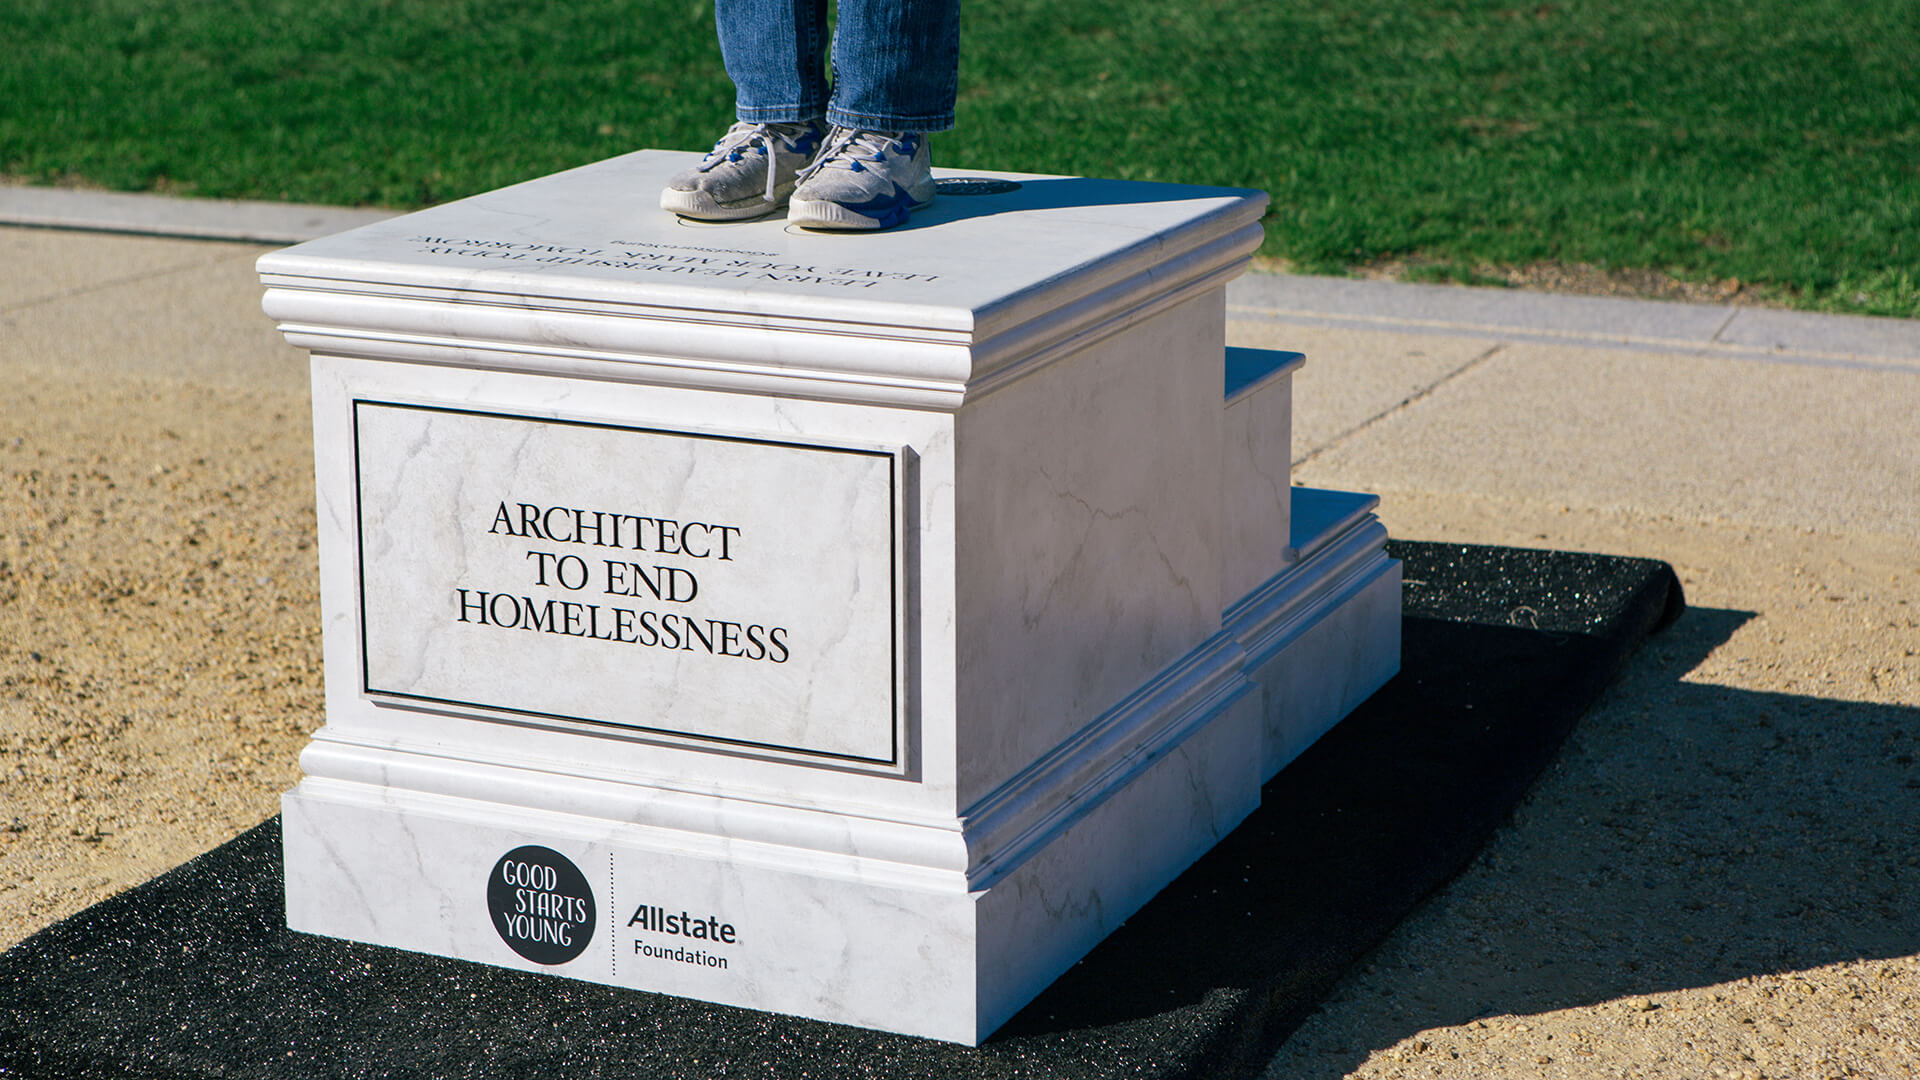 Good Starts Young Pedestals - Architect to End Homelessness